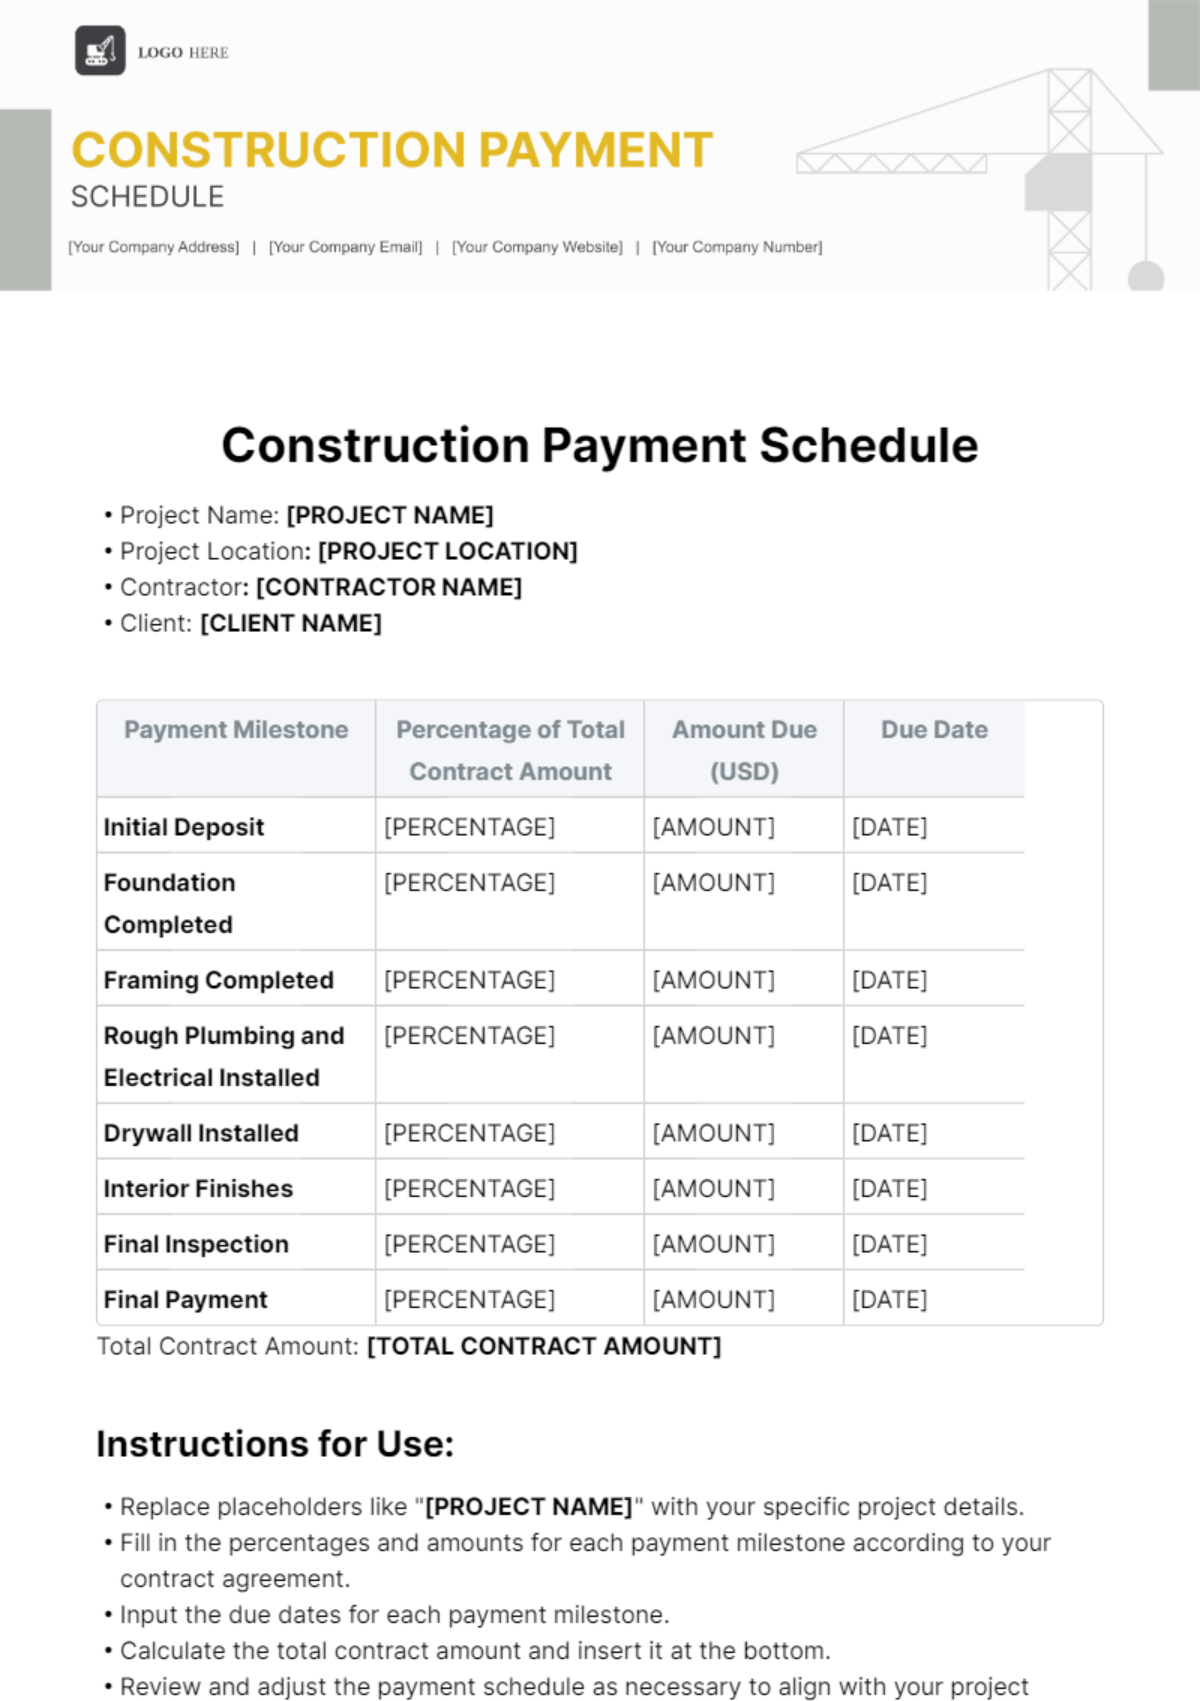 Free Construction Payment Schedule Template